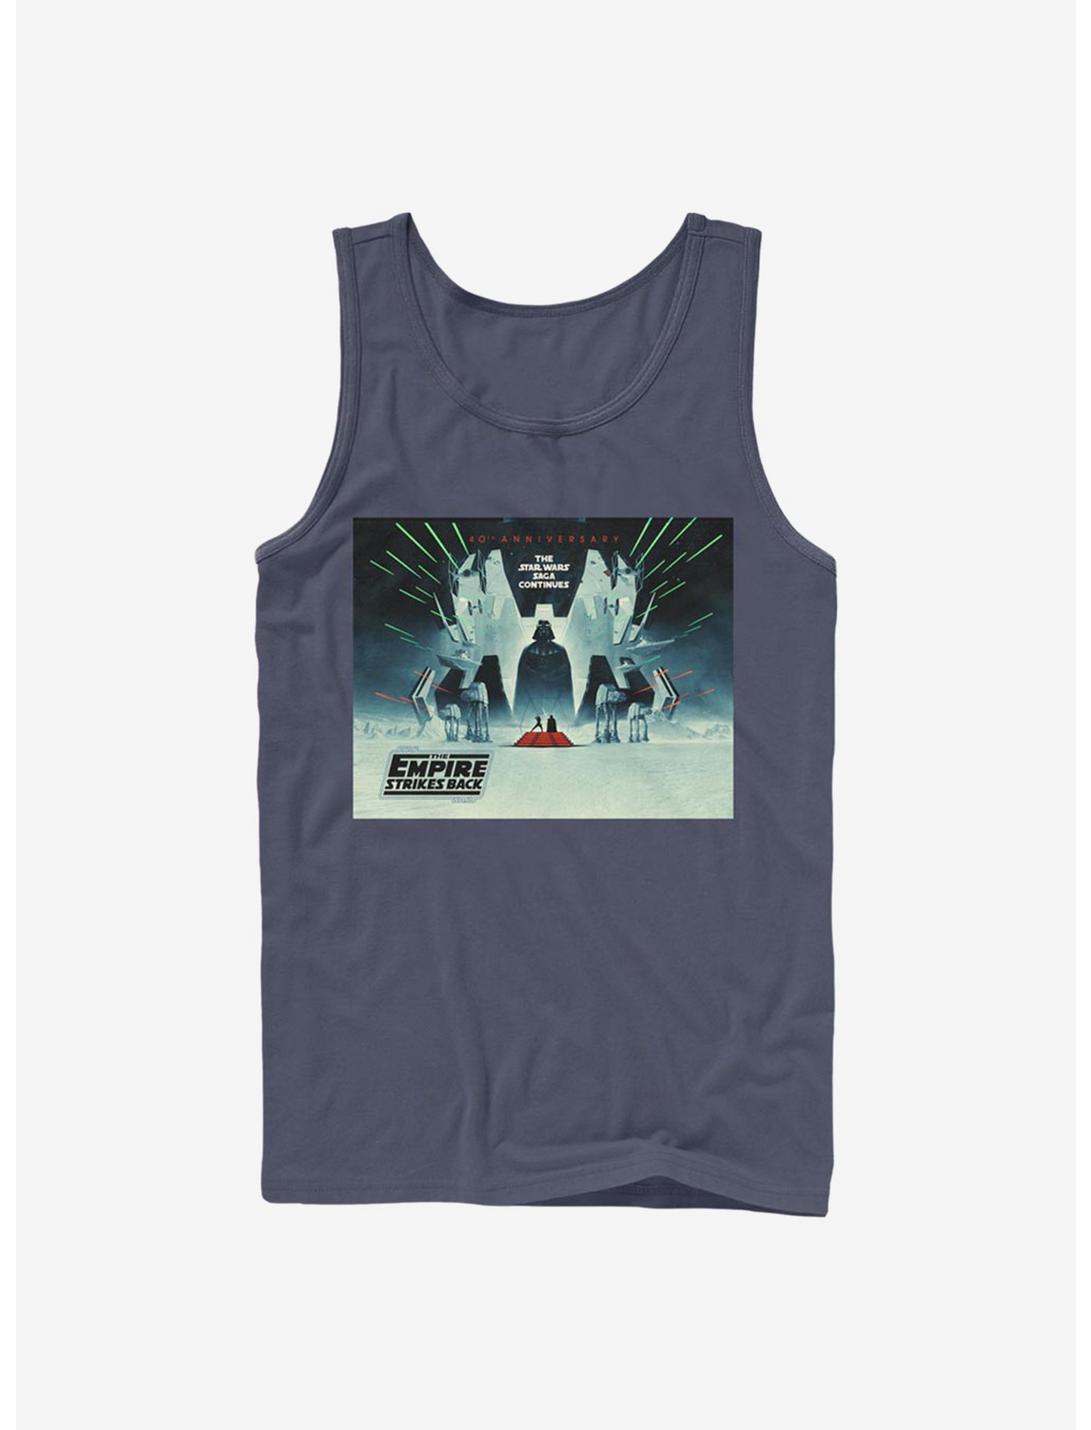 Star Wars Episode V The Empire Strikes Back 40th Anniversary Poster Tank Top, NAVY, hi-res